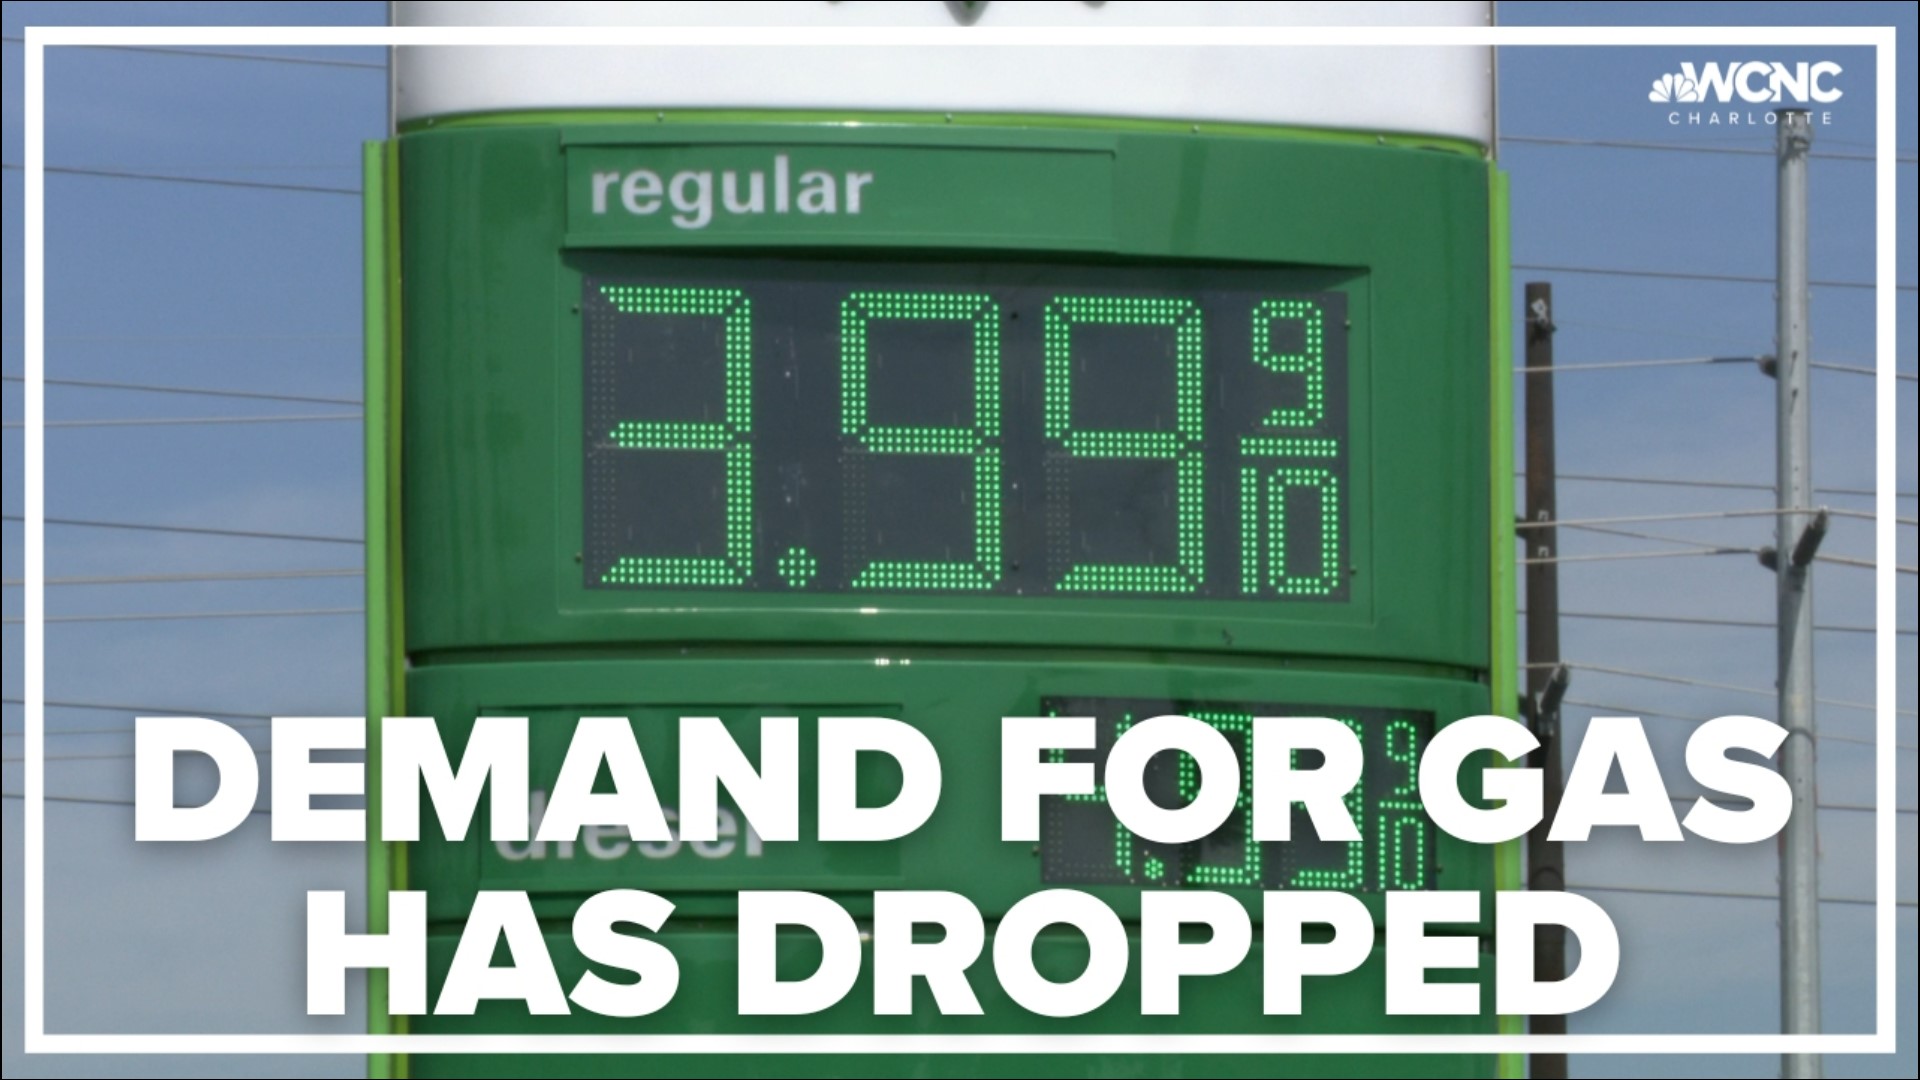 Gas prices have gone down about 15 cents in the last week.